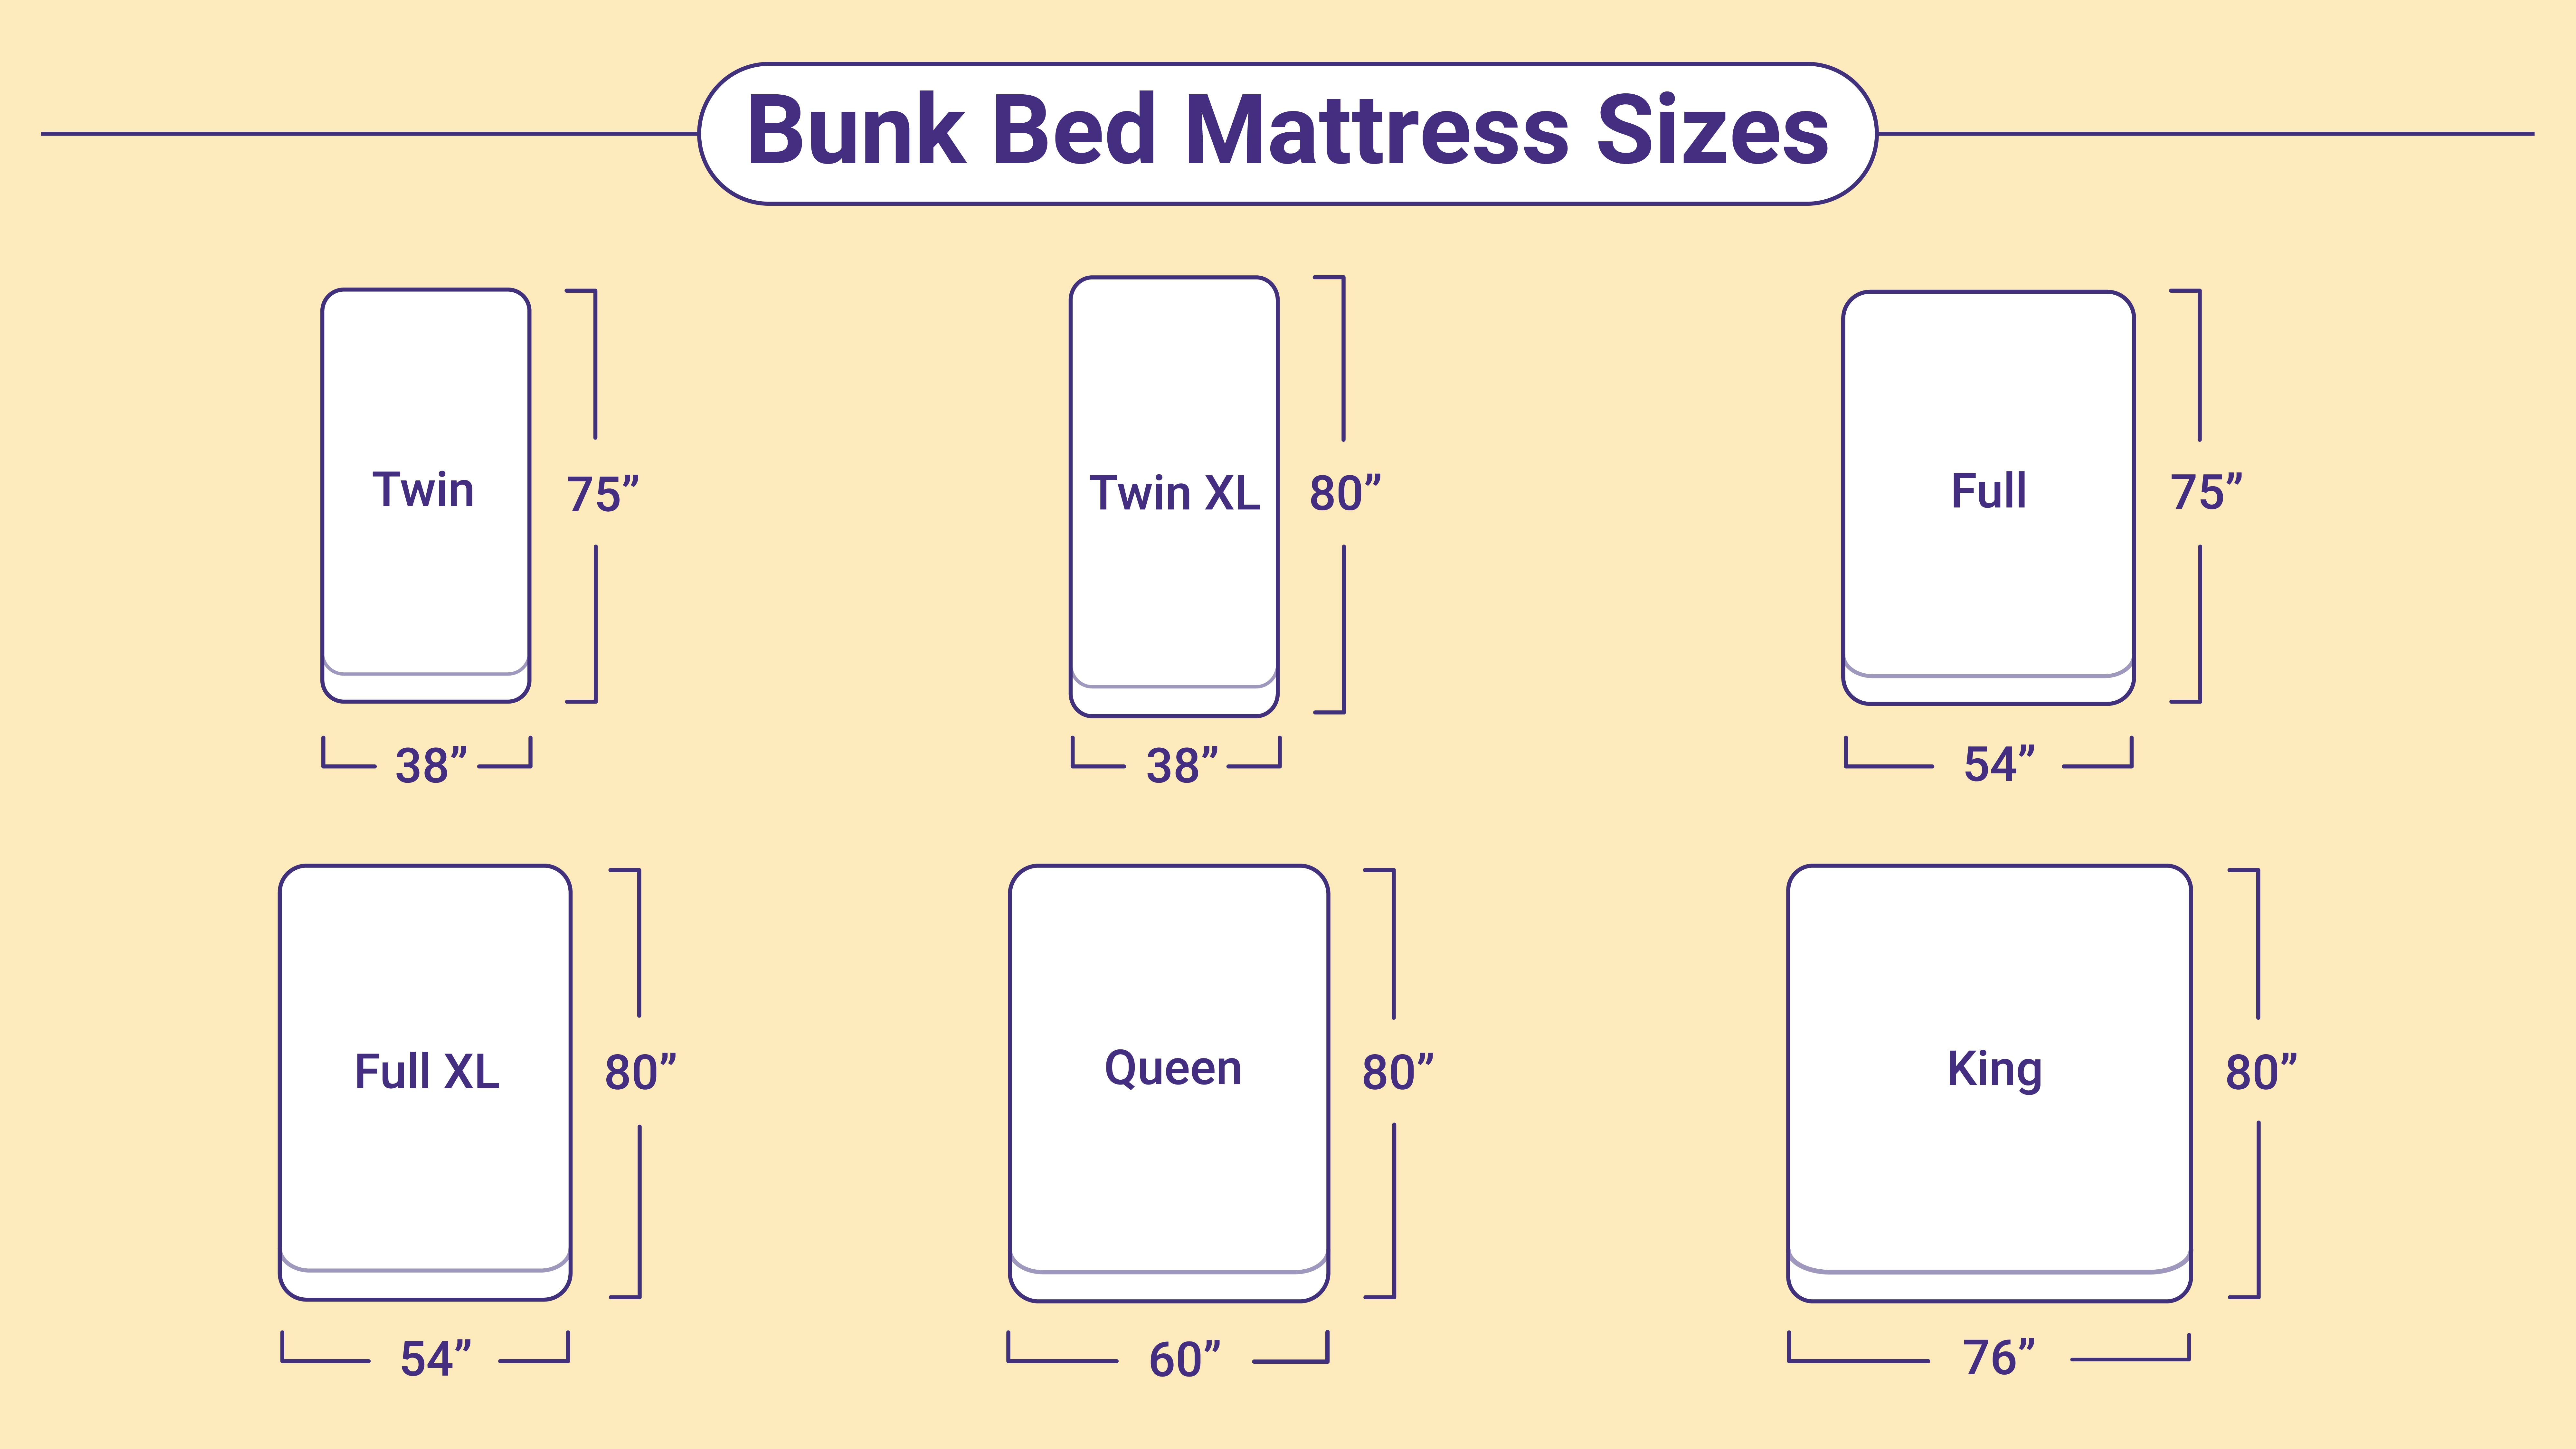 Bunk Bed Mattress Sizes And Dimensions, How Long Is A Standard Twin Bed